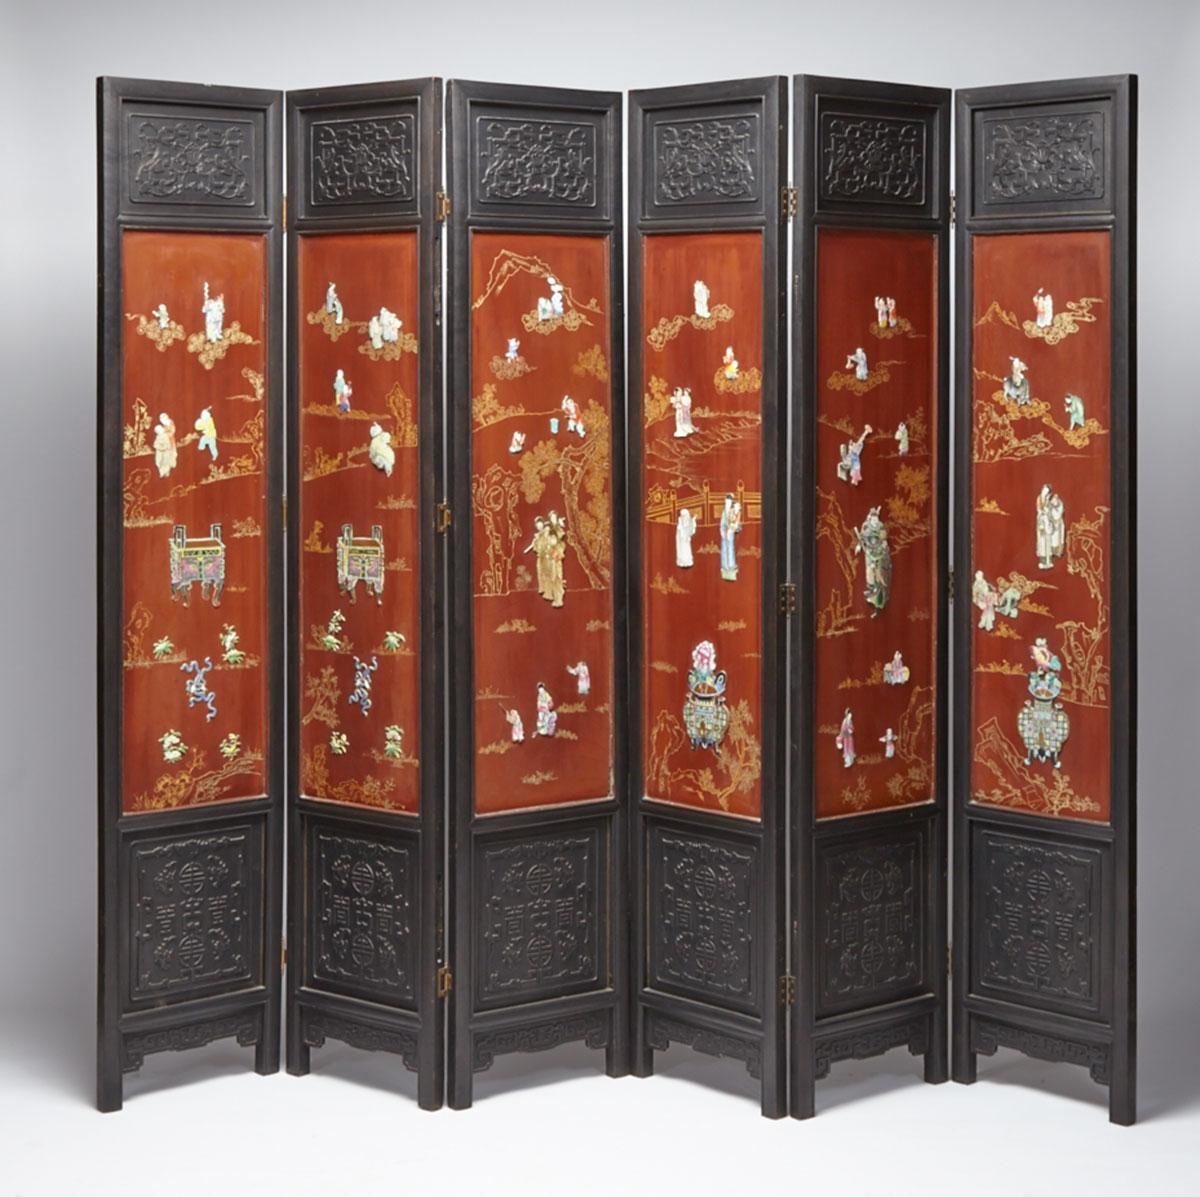 Six-Panel Porcelain Inlay Lacquer Screen